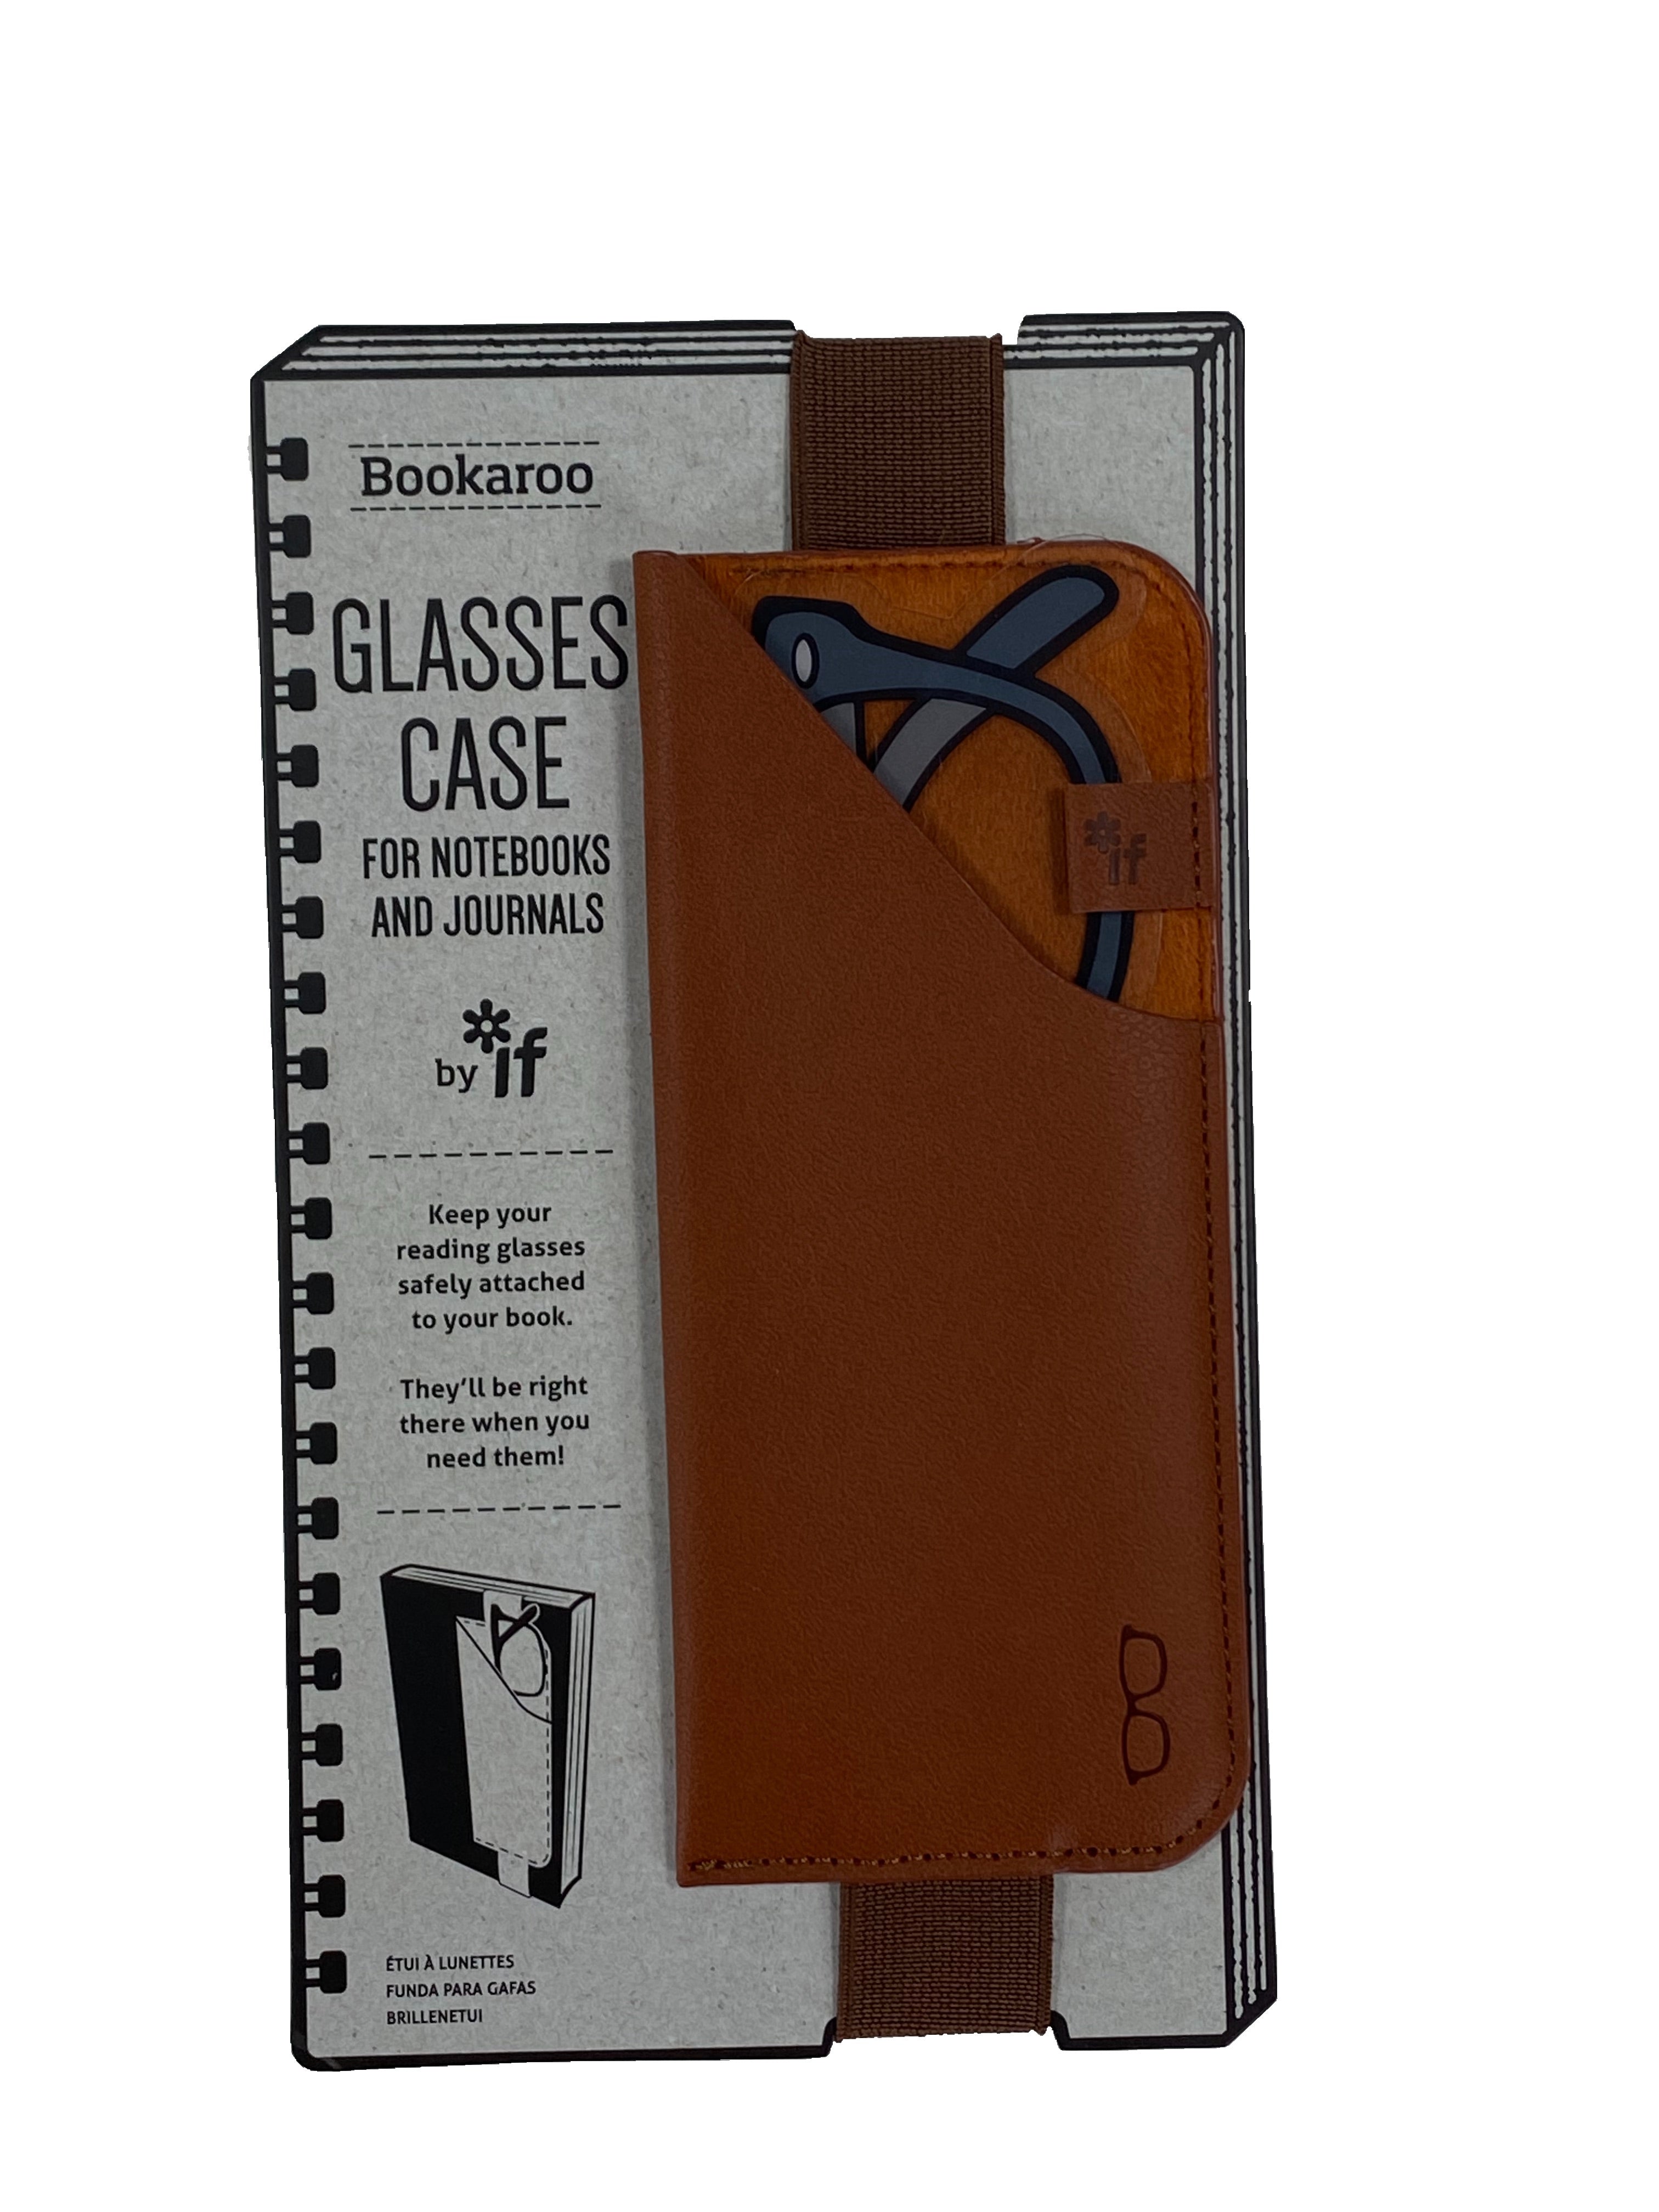 Bookaroo Glasses Case - Brown - For Notebooks and Journals    